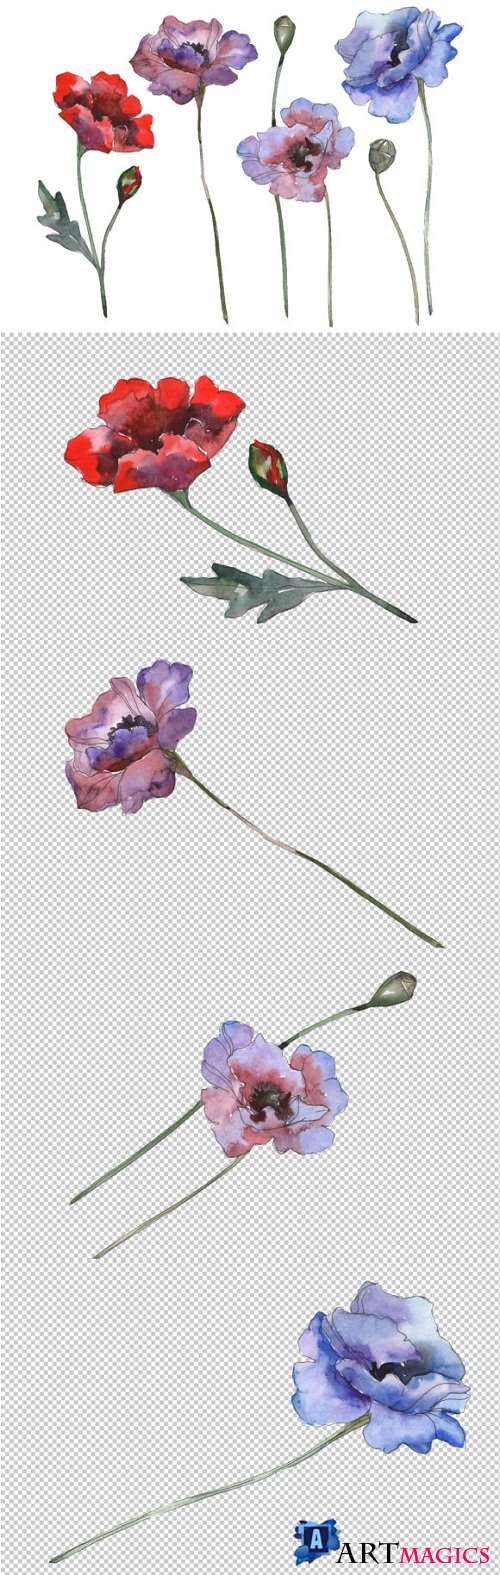 Poppy 1 Watercolor png - 229877